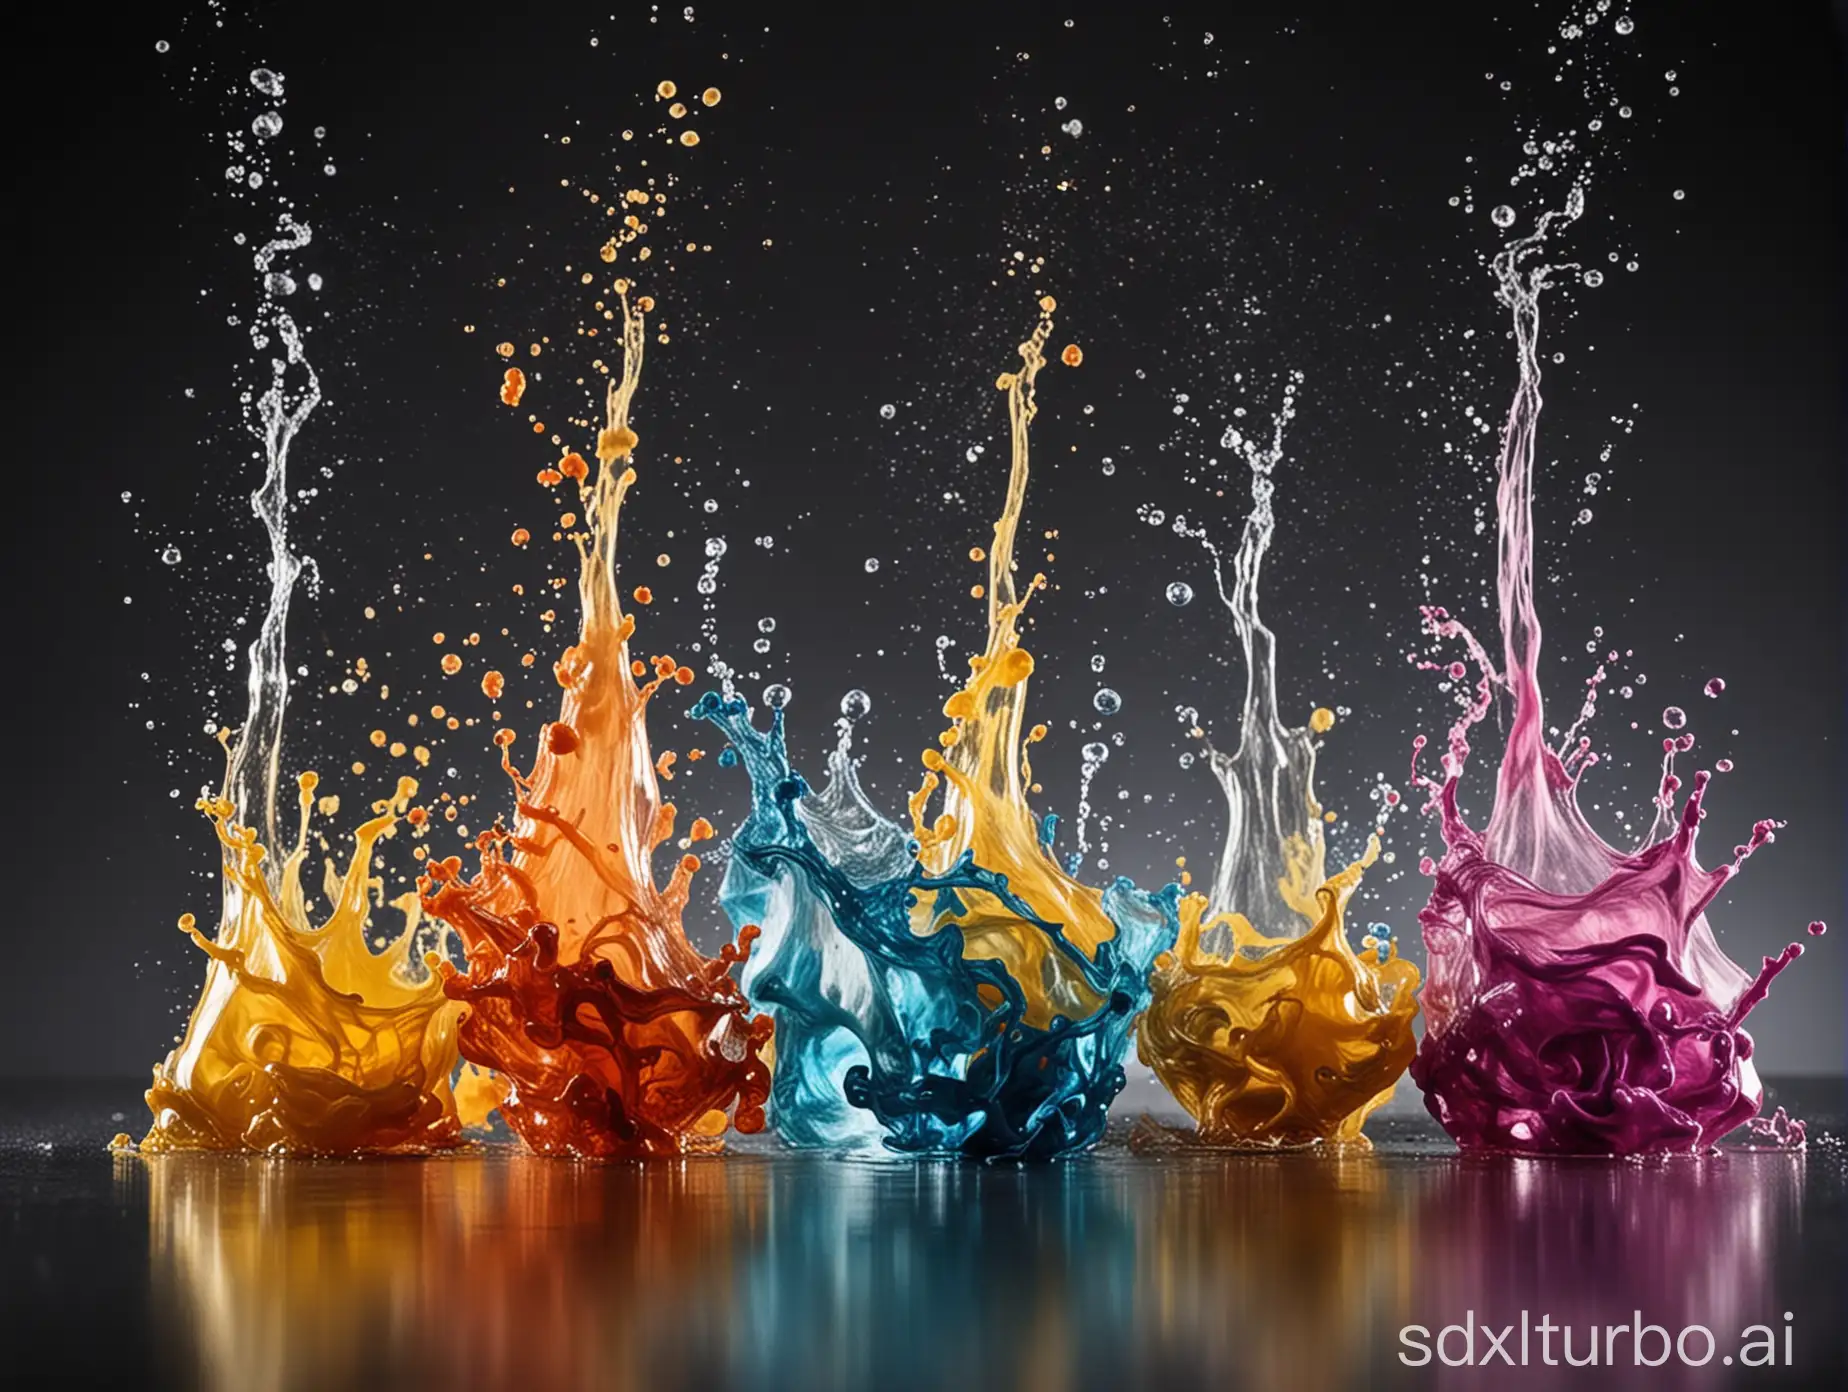 Colorful-Aromas-Mixing-in-a-Splash-of-Scented-Harmony